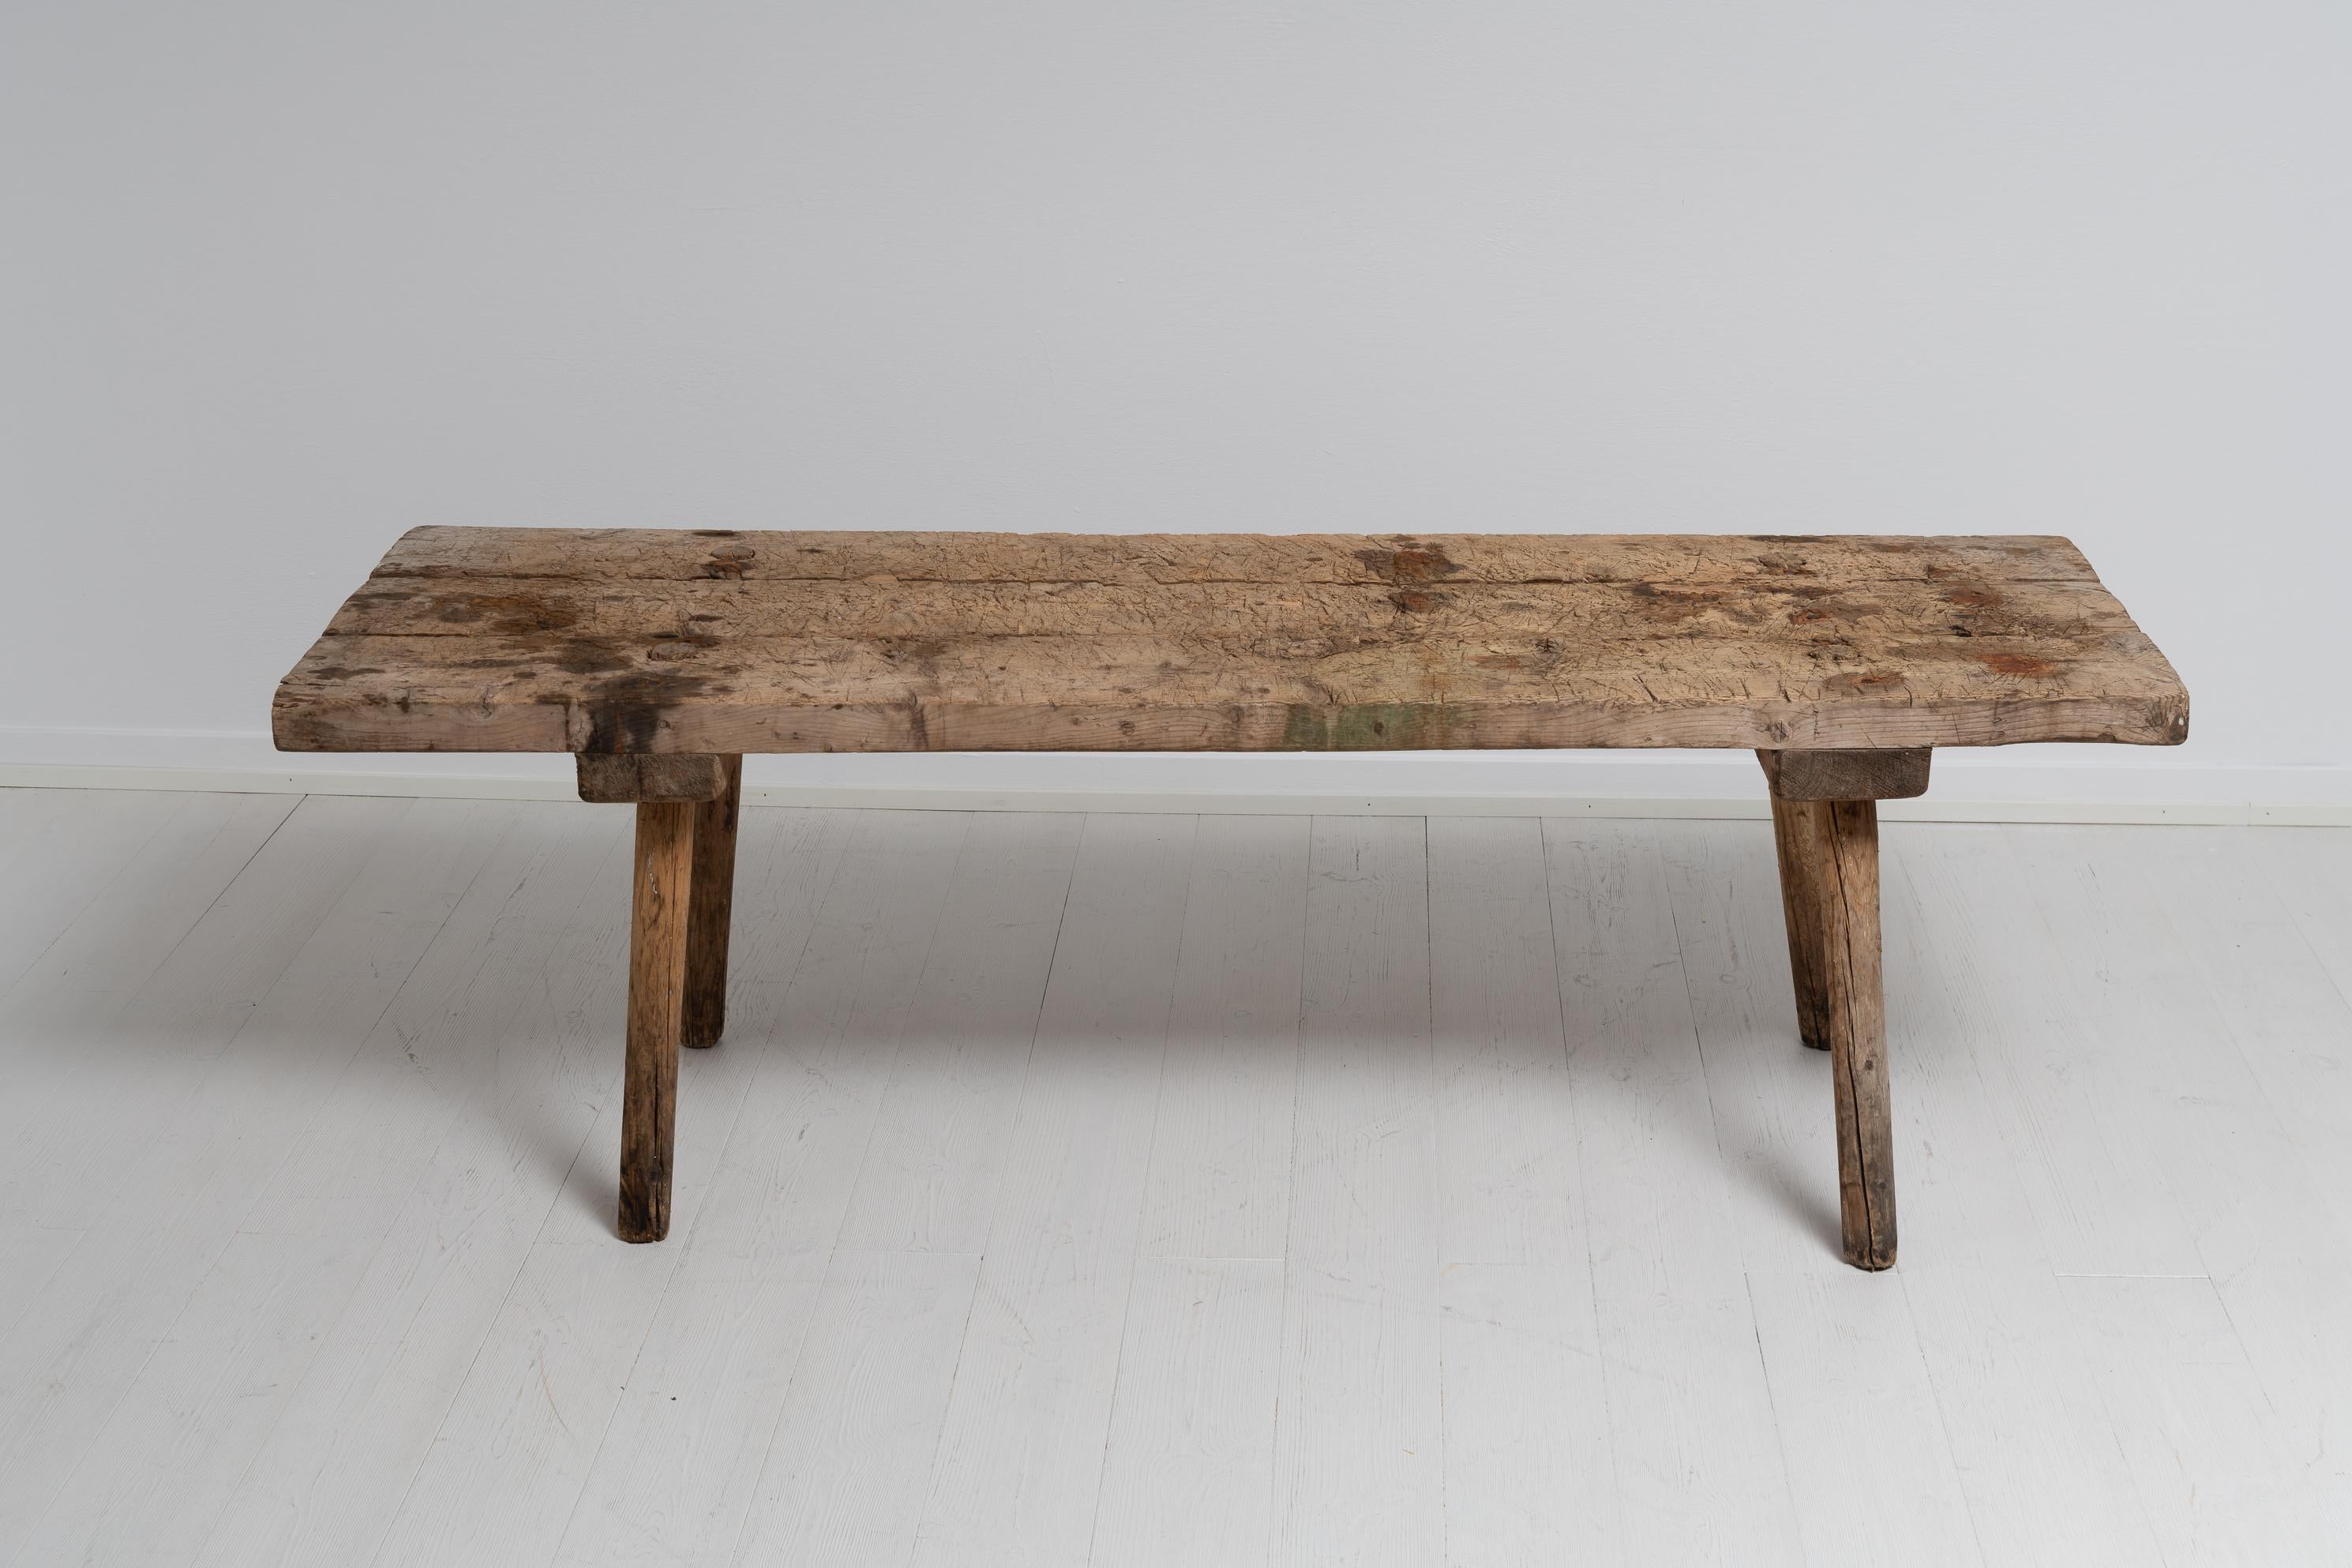 Early 19th Century Swedish Folk Art Rustic Work Bench Coffee Table For Sale 2